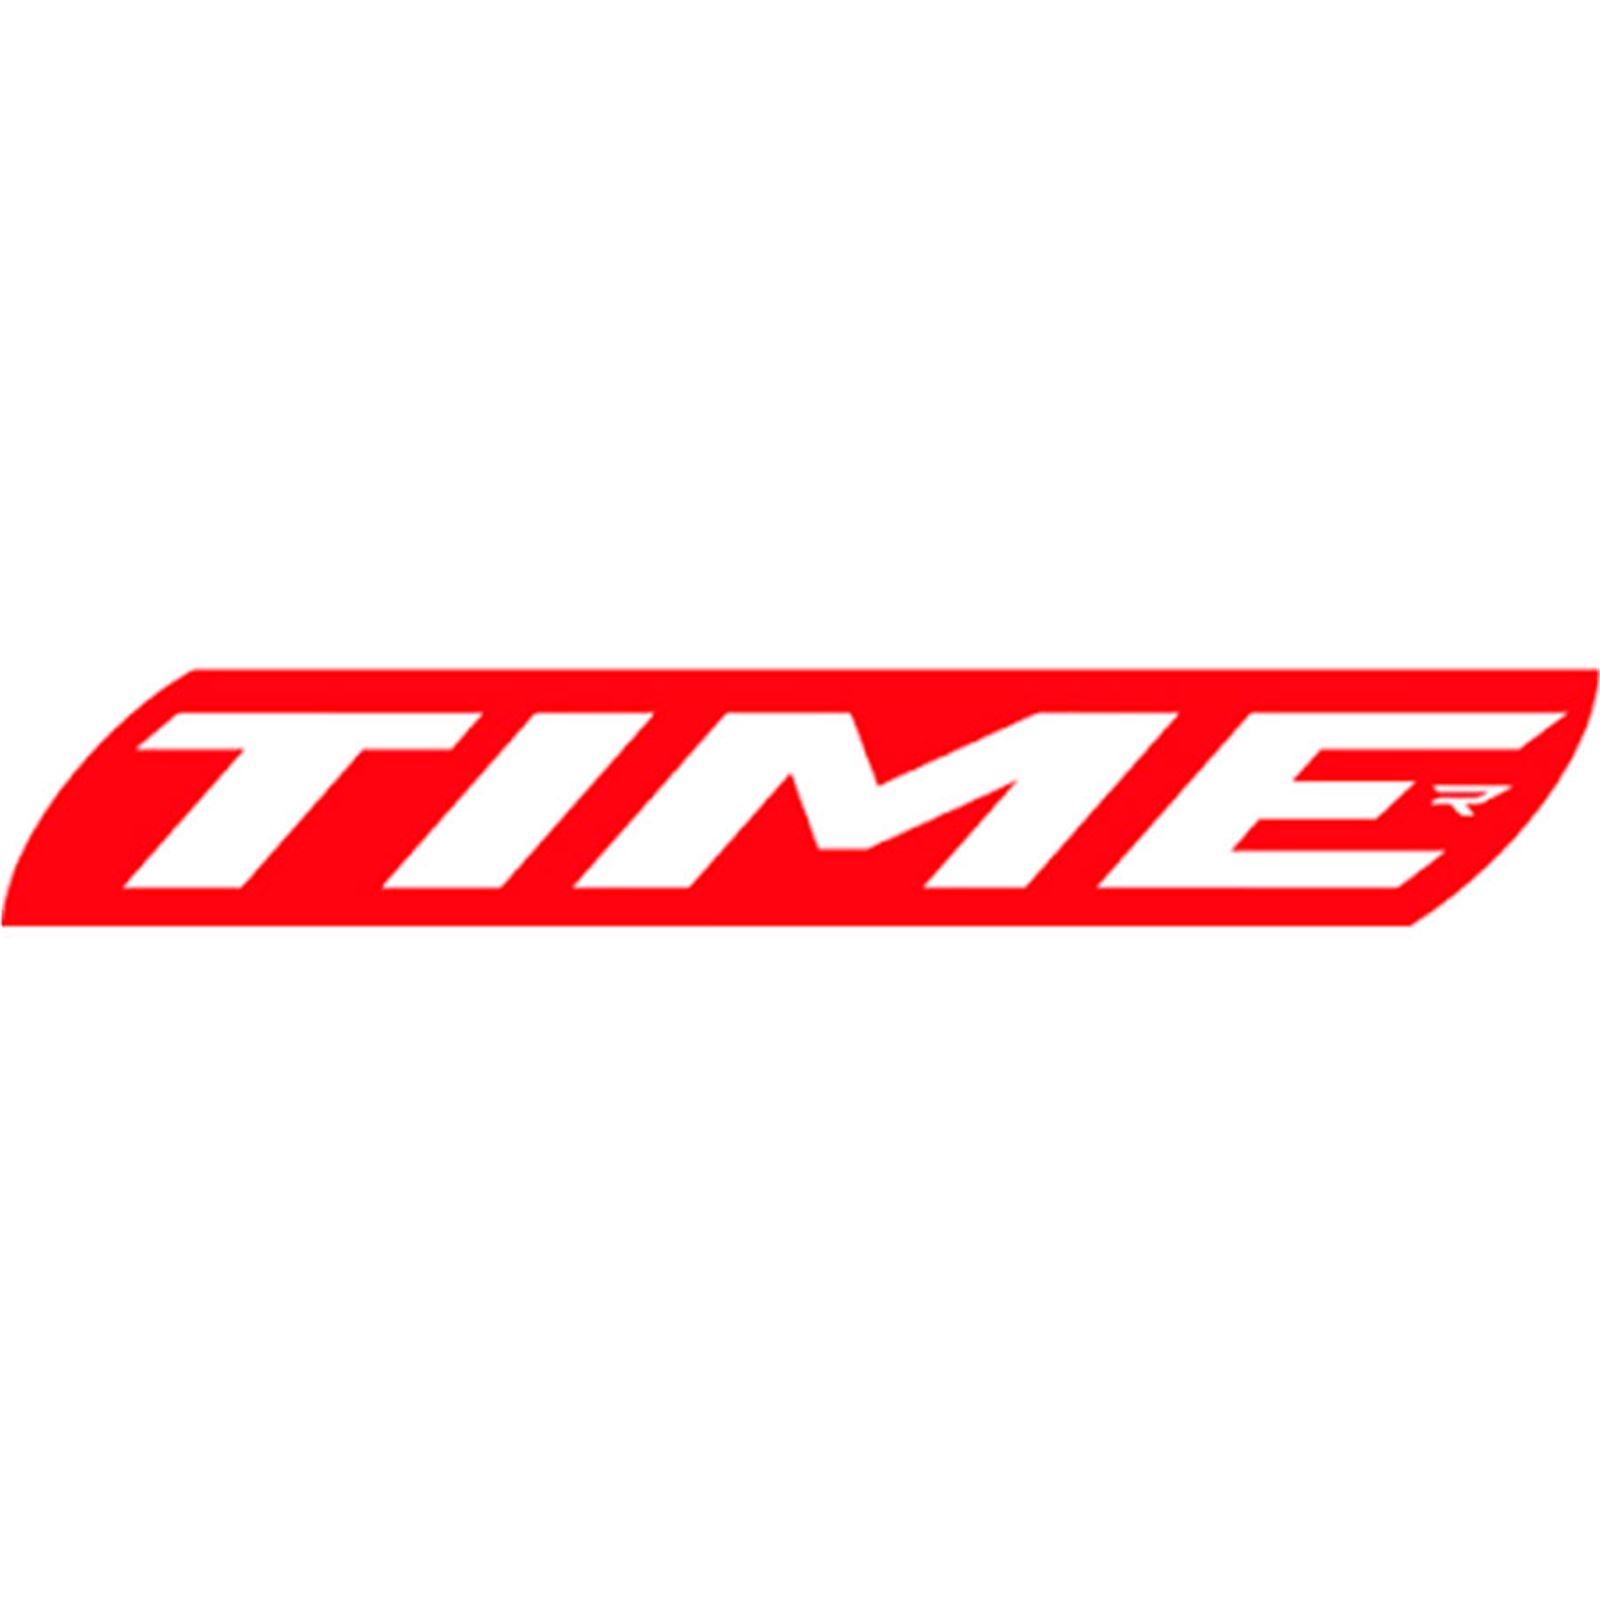 TIME